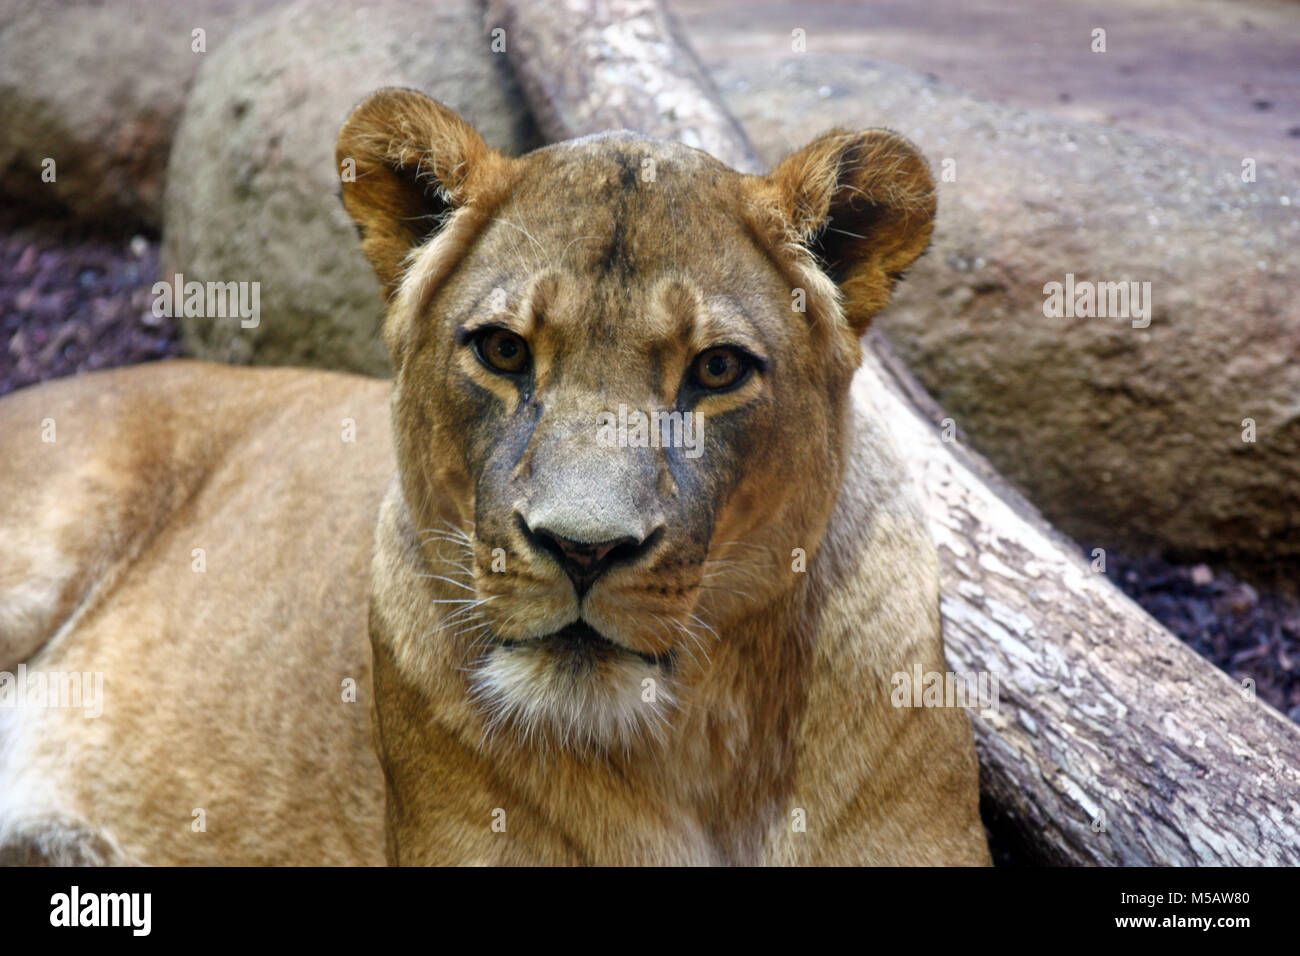 Lioness portrit, close-up, photographed at the zoo Stock Photo